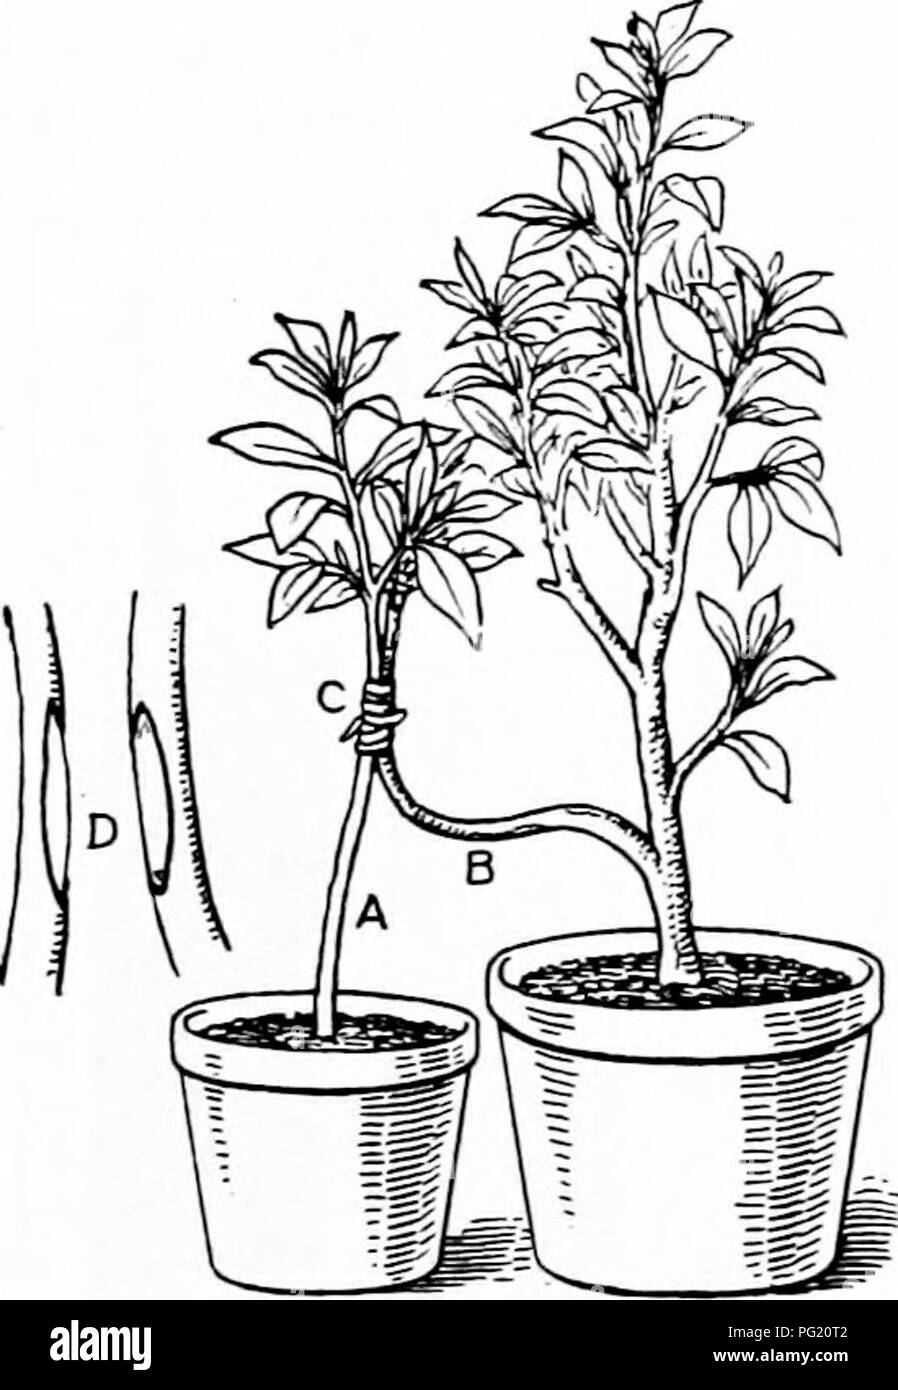 . Plant propagation : greenhouse and nursery practice . Plant propagation. CHAPTER XVI METHODS OF GRAFTING 295. Classification of graftage.—Graftage methods nat- urally fall into three general classes: 1, Inarching, or grafting by approach, in which the cion is not severed from the parent plant until after union is complete; 2, cion grafting, or true grafting, in which a twig with at least one bud is placed upon or in a stock; and 3, bud grafting, or, to use its popular term, budding, in which only one bud is placed beneath the bark of the stock upon the surface of the young wood. 296. Inarchi Stock Photo